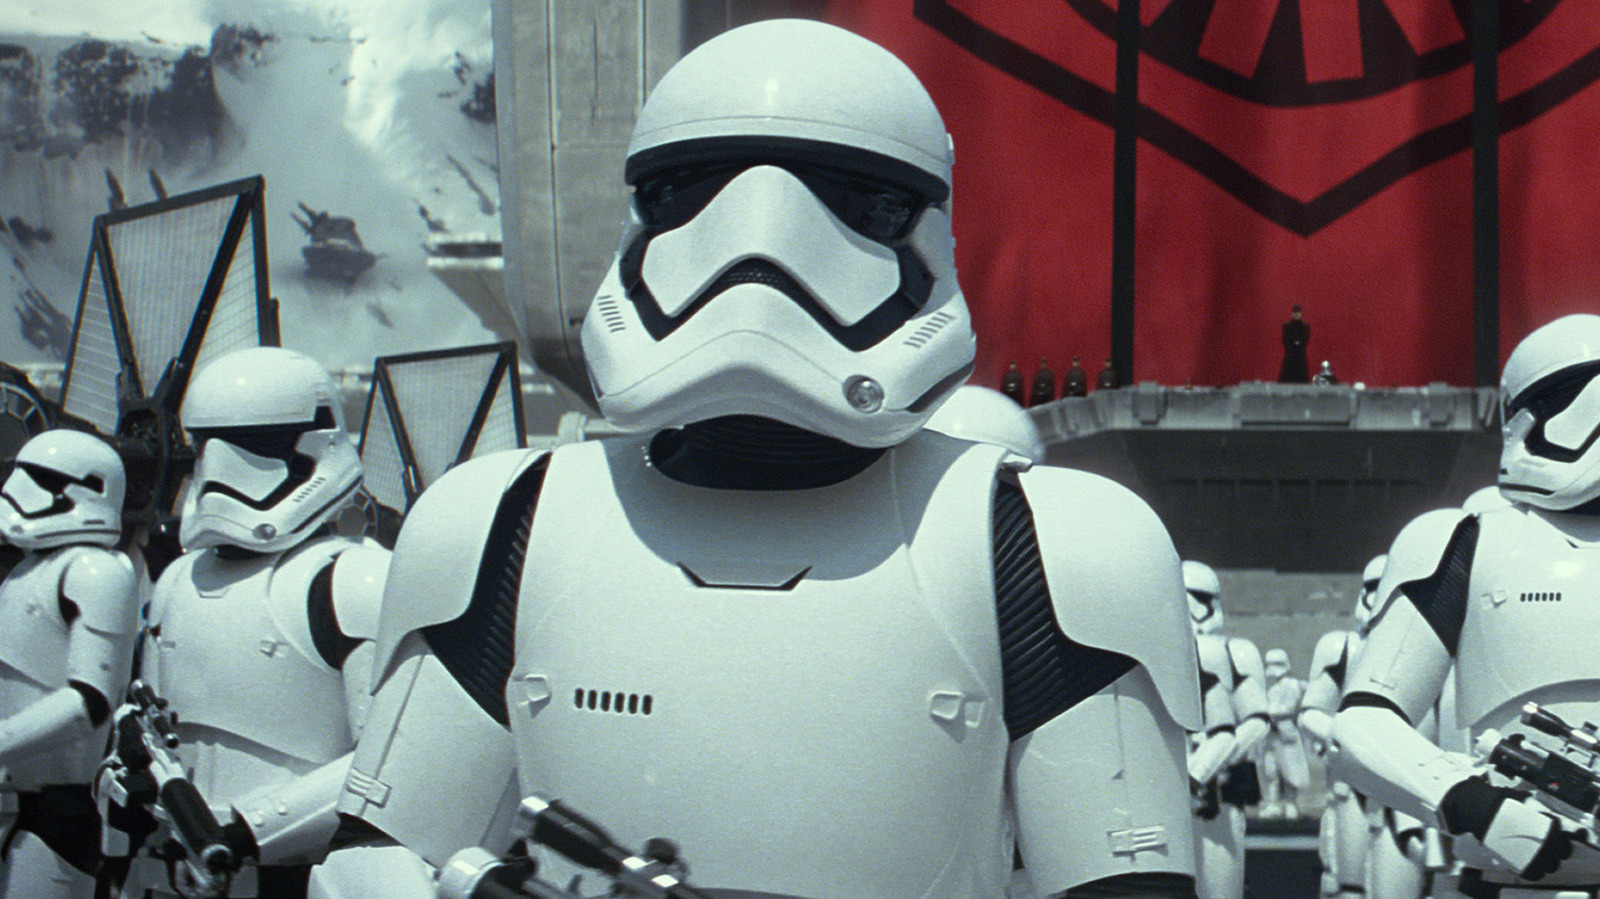 difference between storm trooper and clone trooper